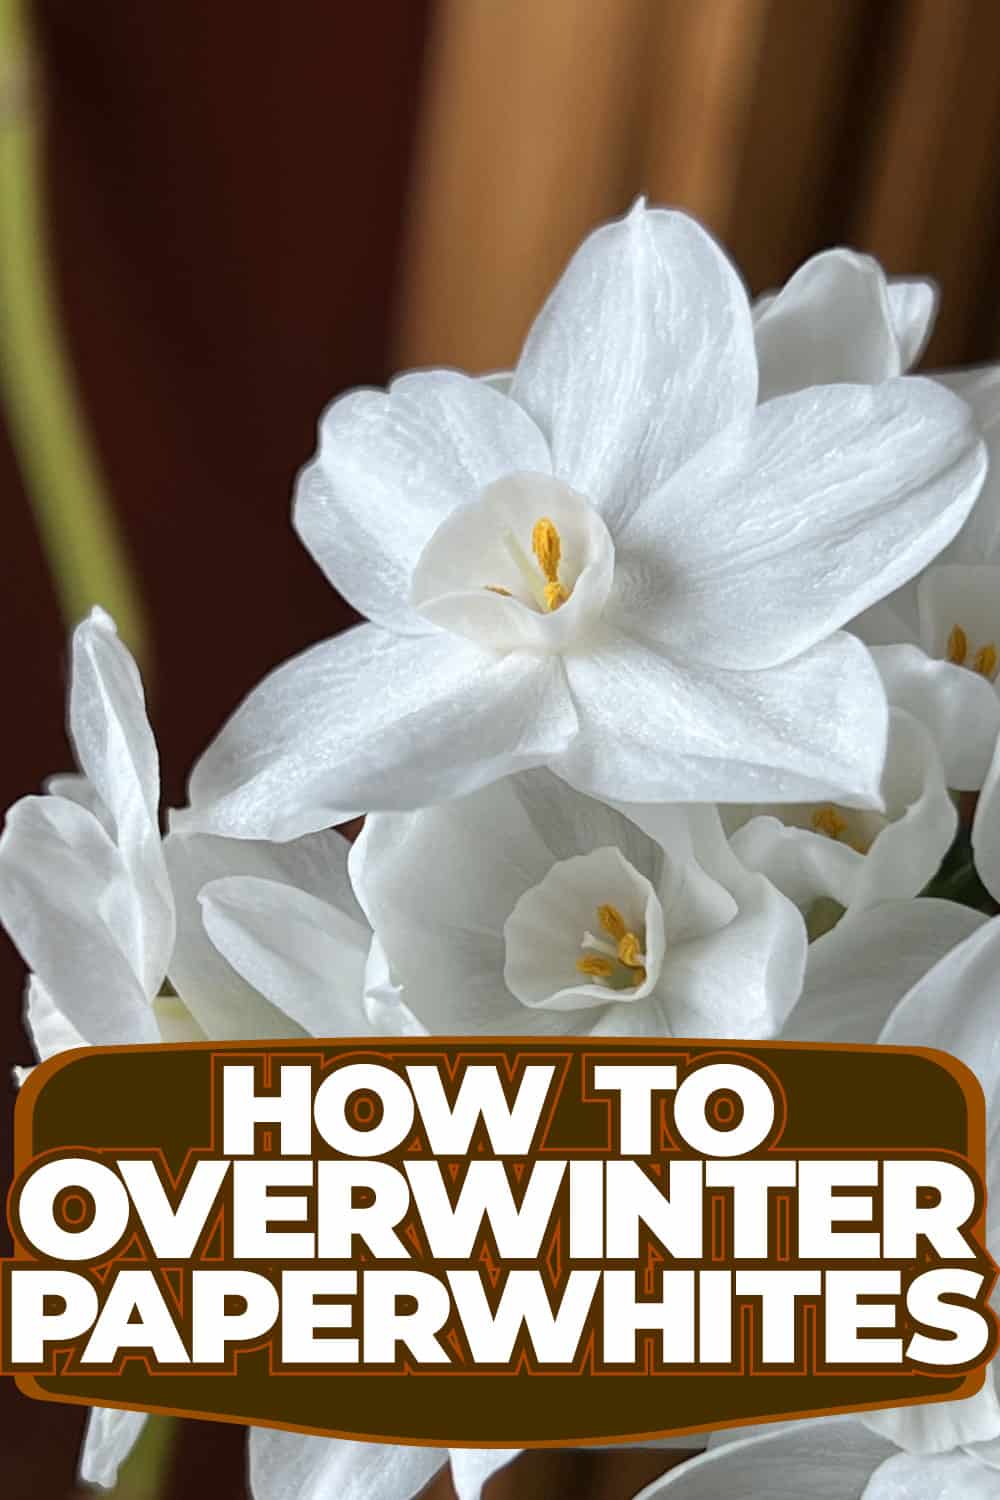 How To Overwinter Paperwhites